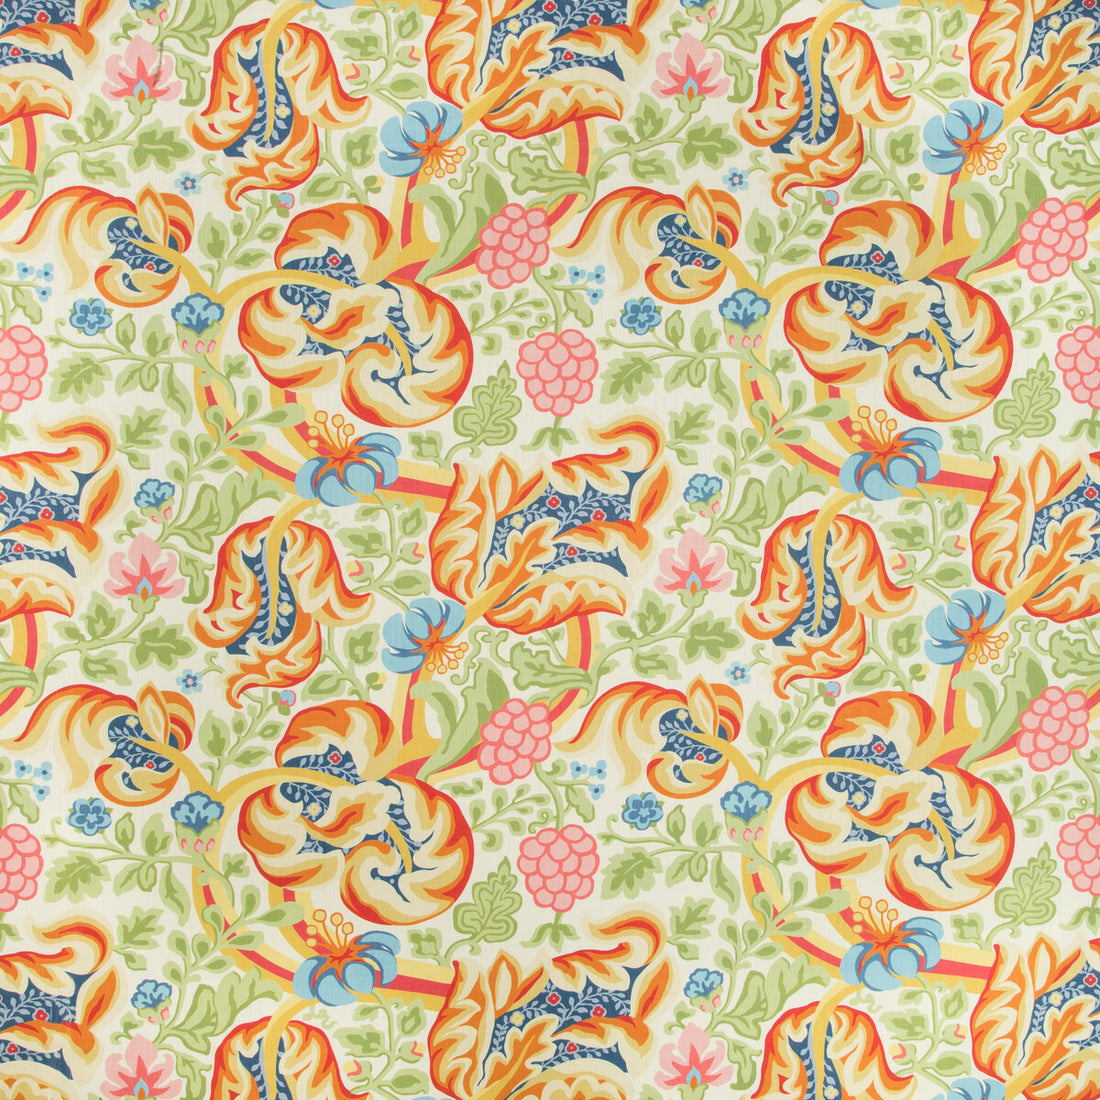 Hullabaloo fabric in prism color - pattern HULLABALOO.324.0 - by Kravet Basics in the Bermuda collection